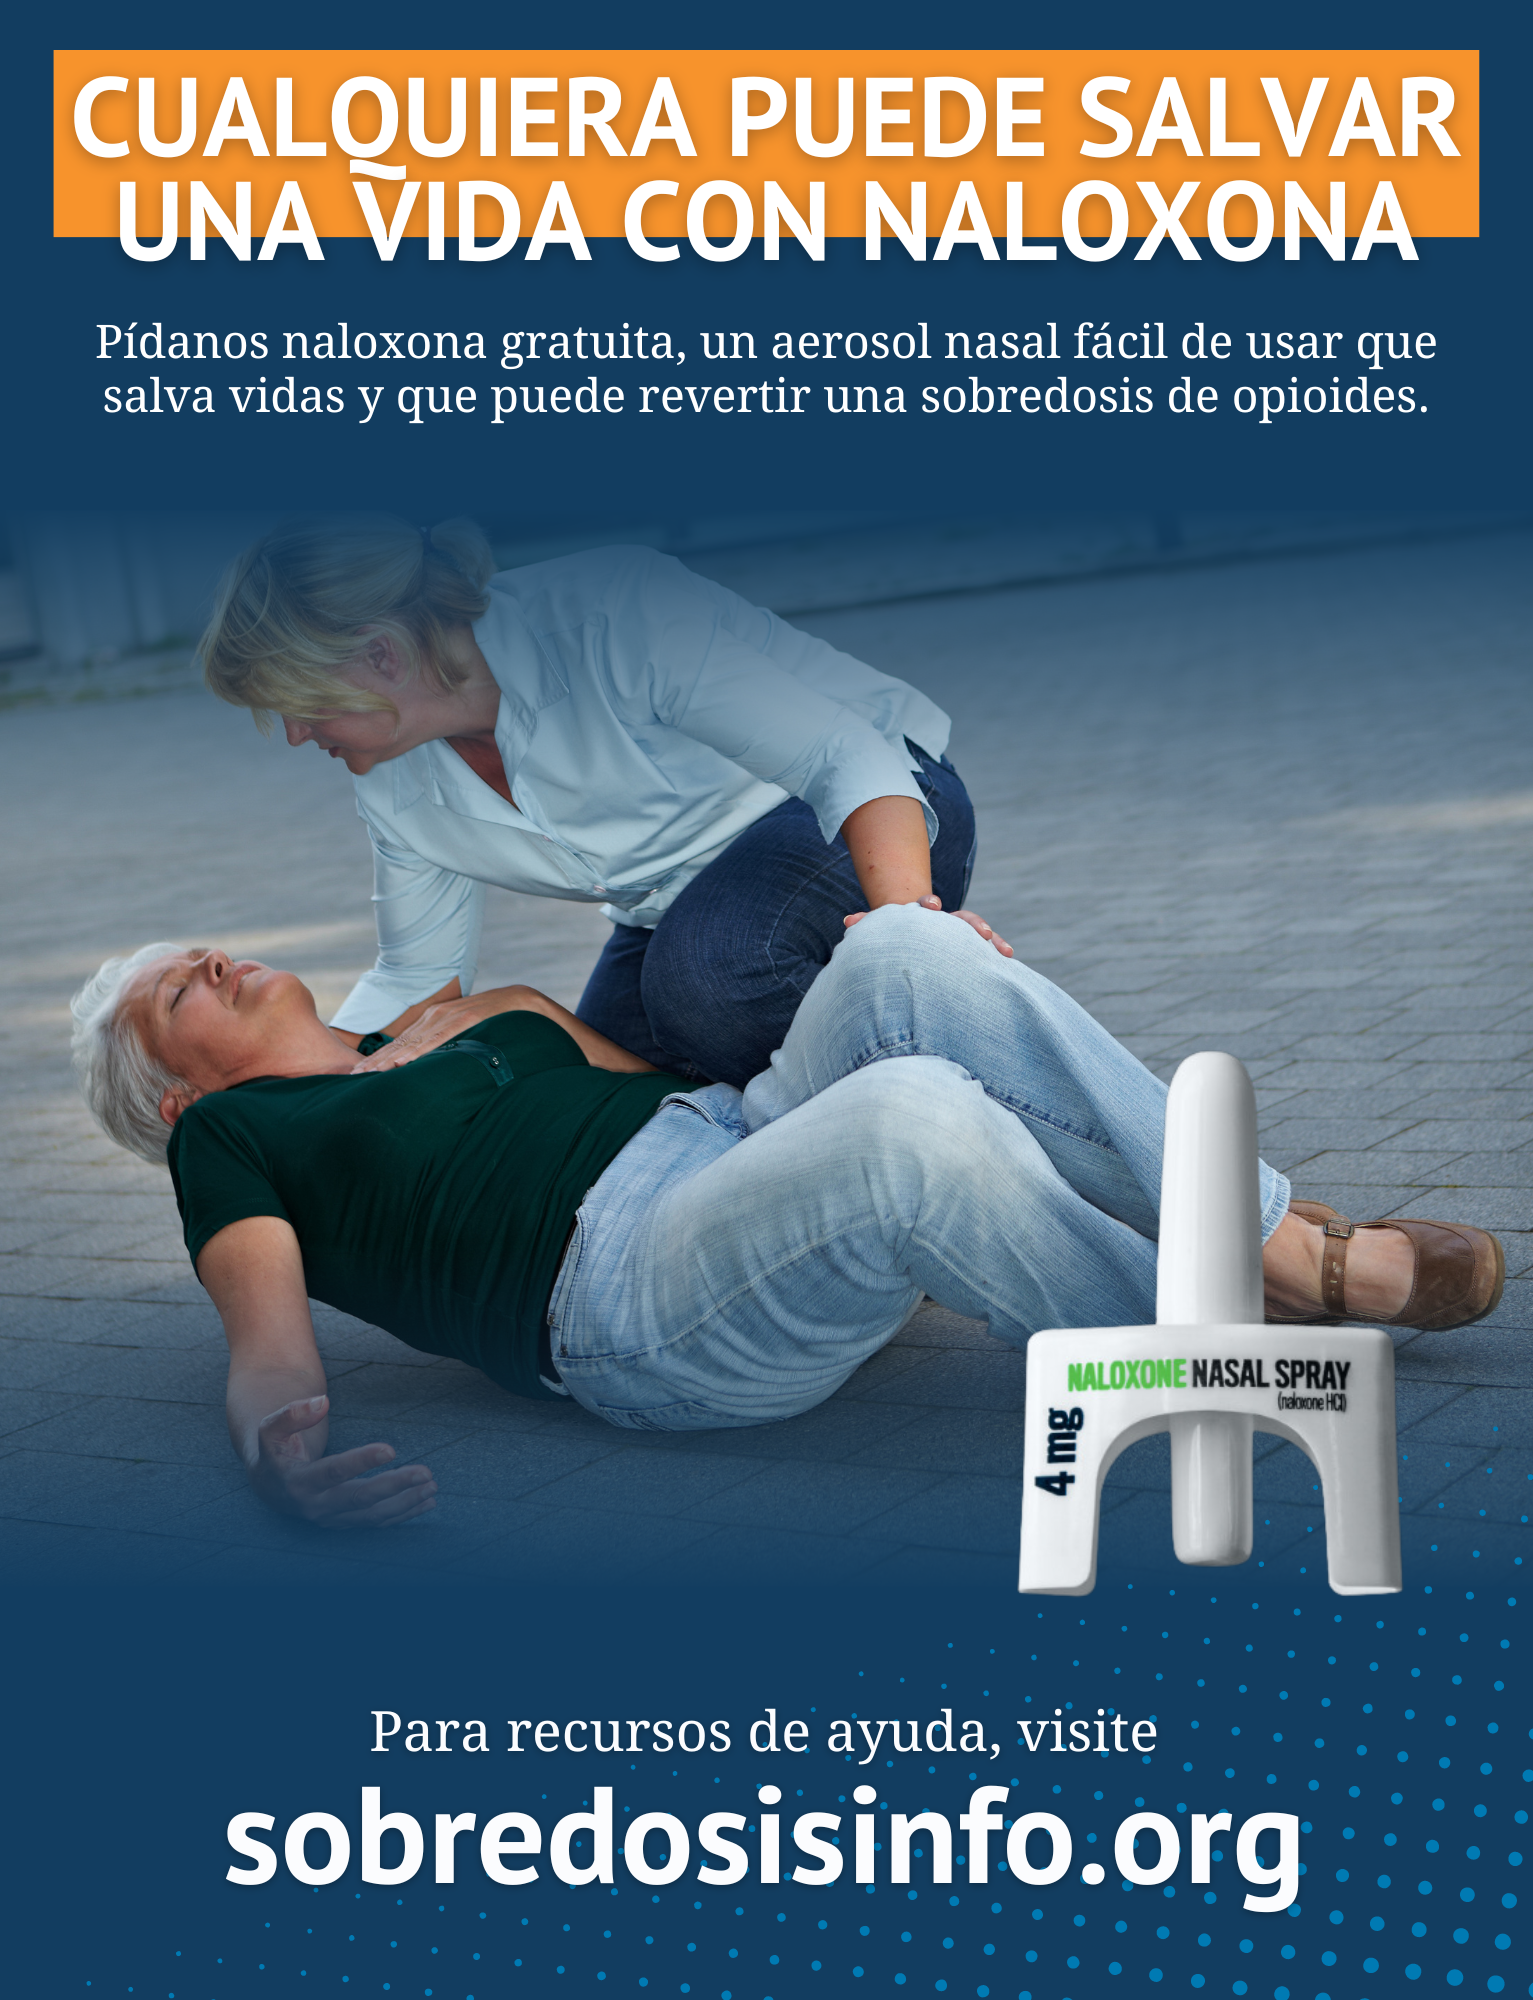 Anyone can save a life with naloxone poster 11.5 x 15 (4).png